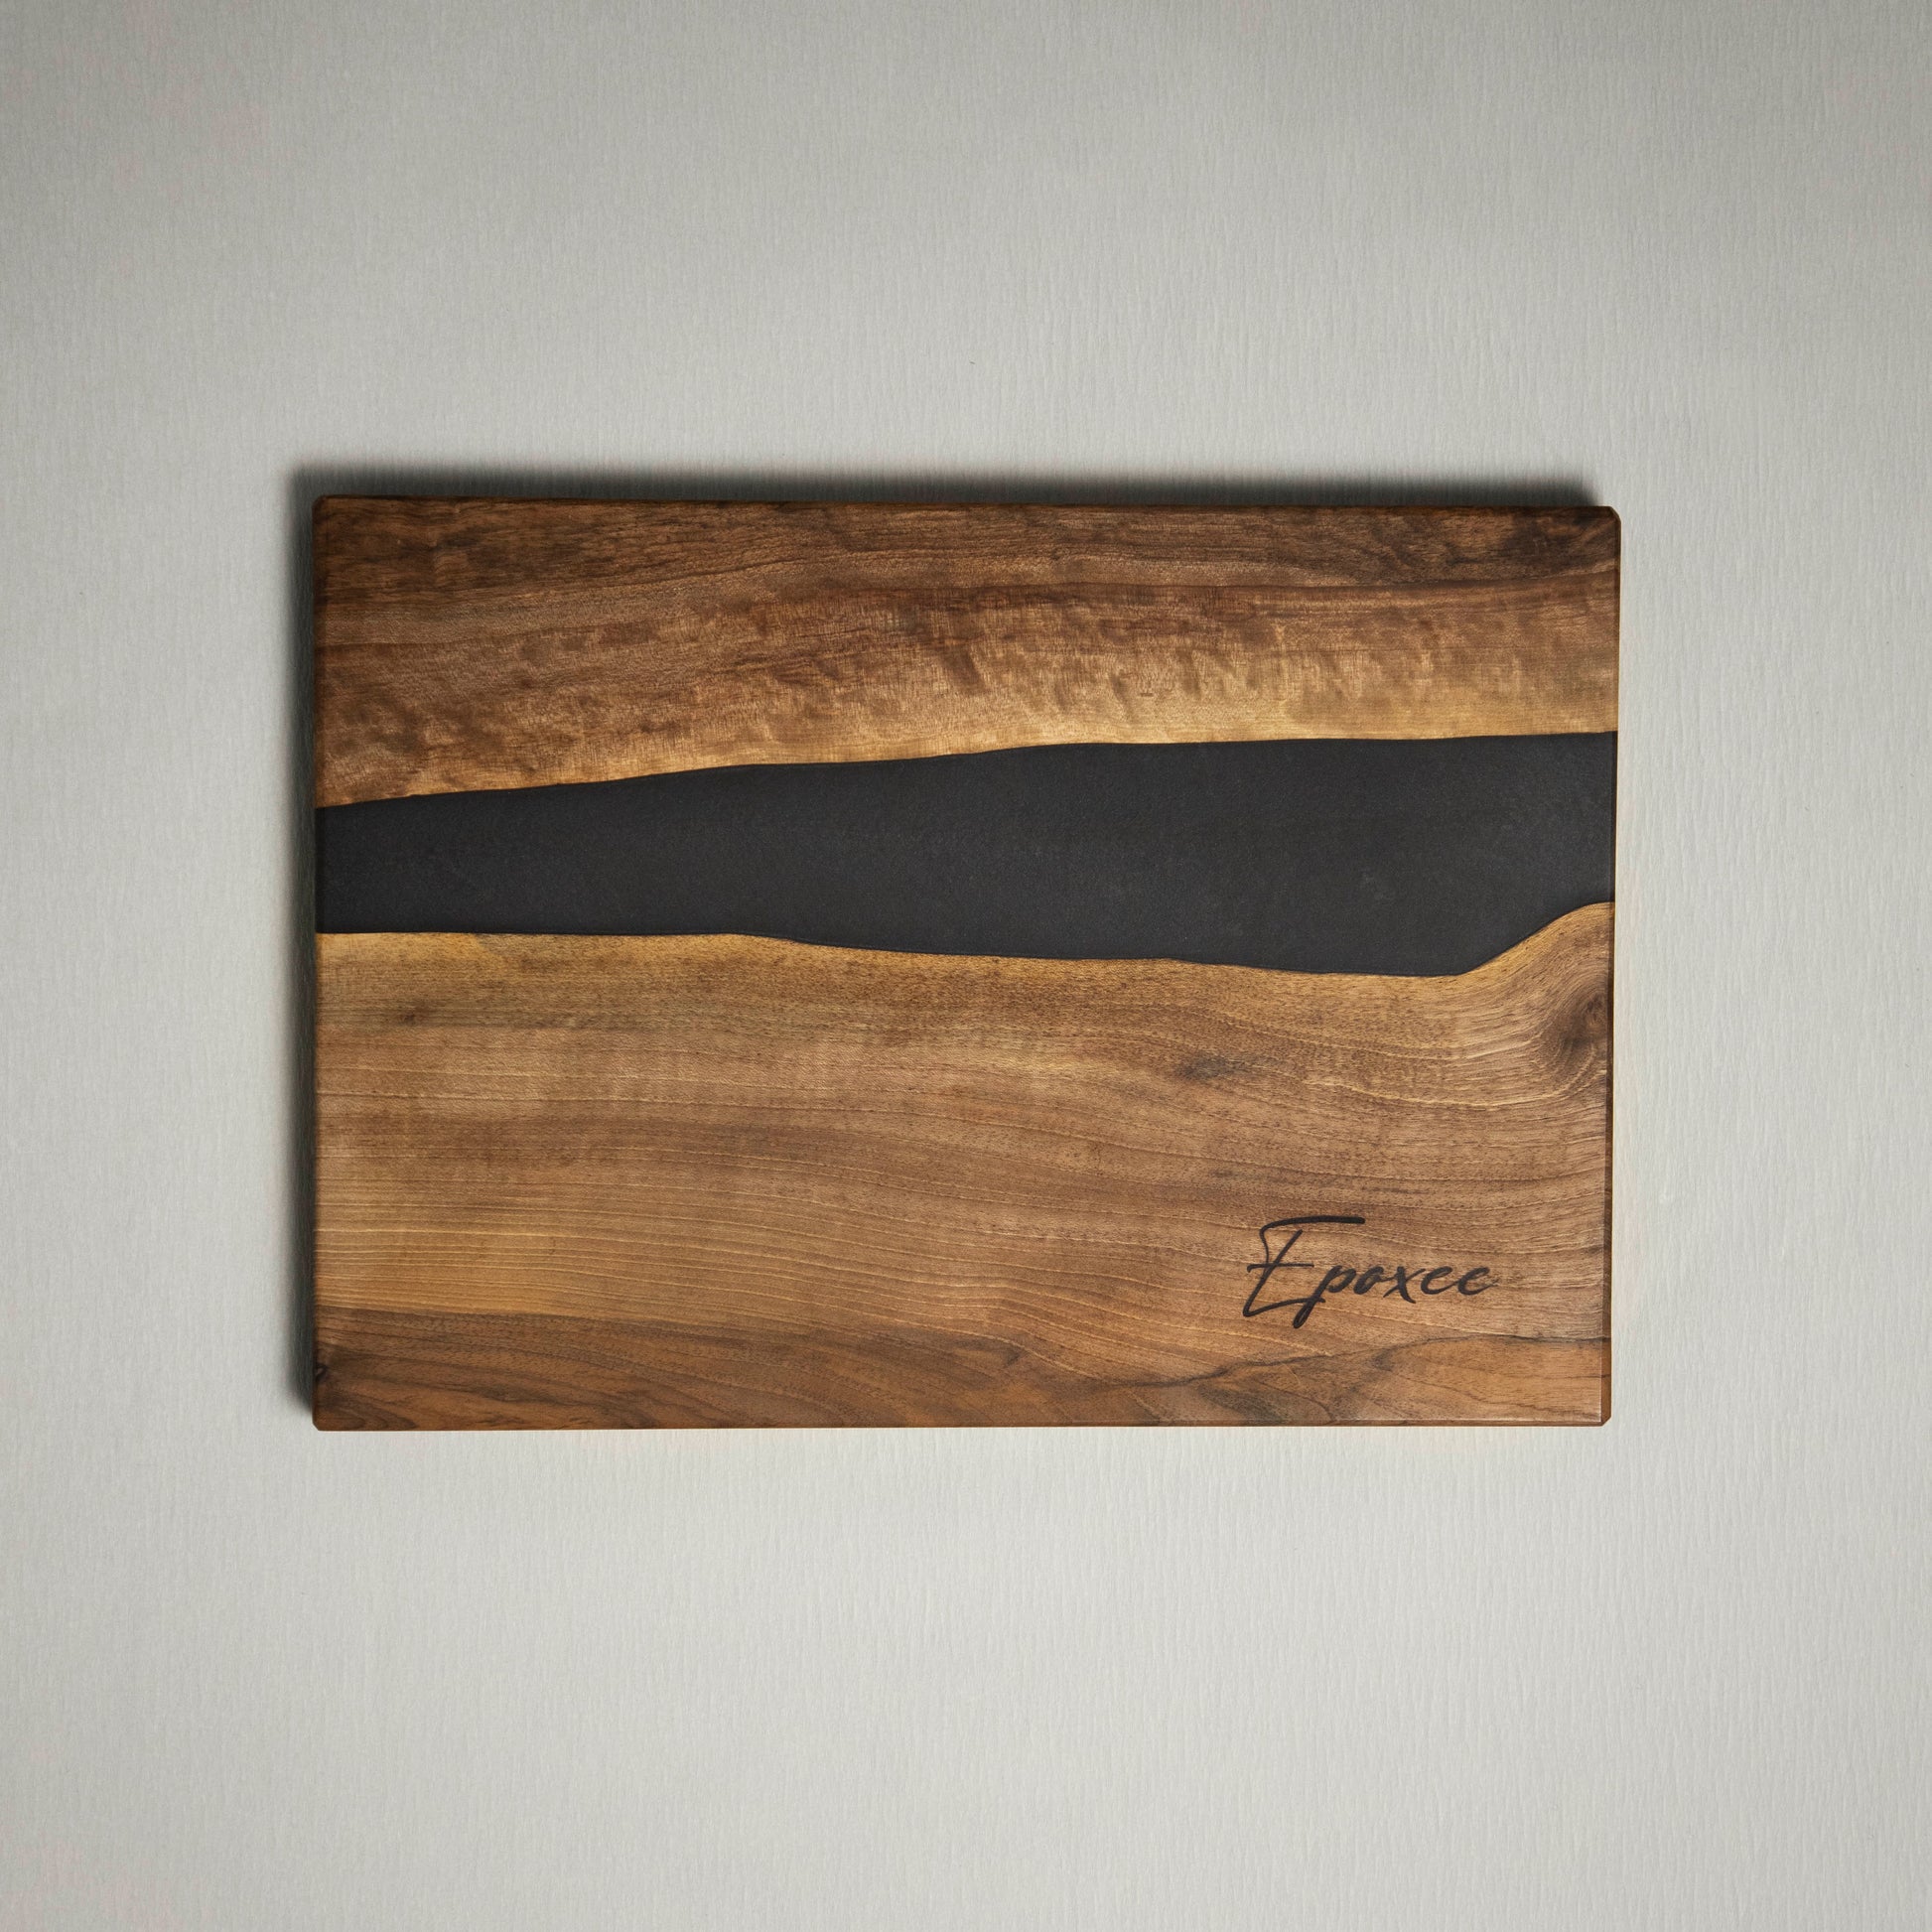 Serving board made from wood and epoxy resin in the color gun powder